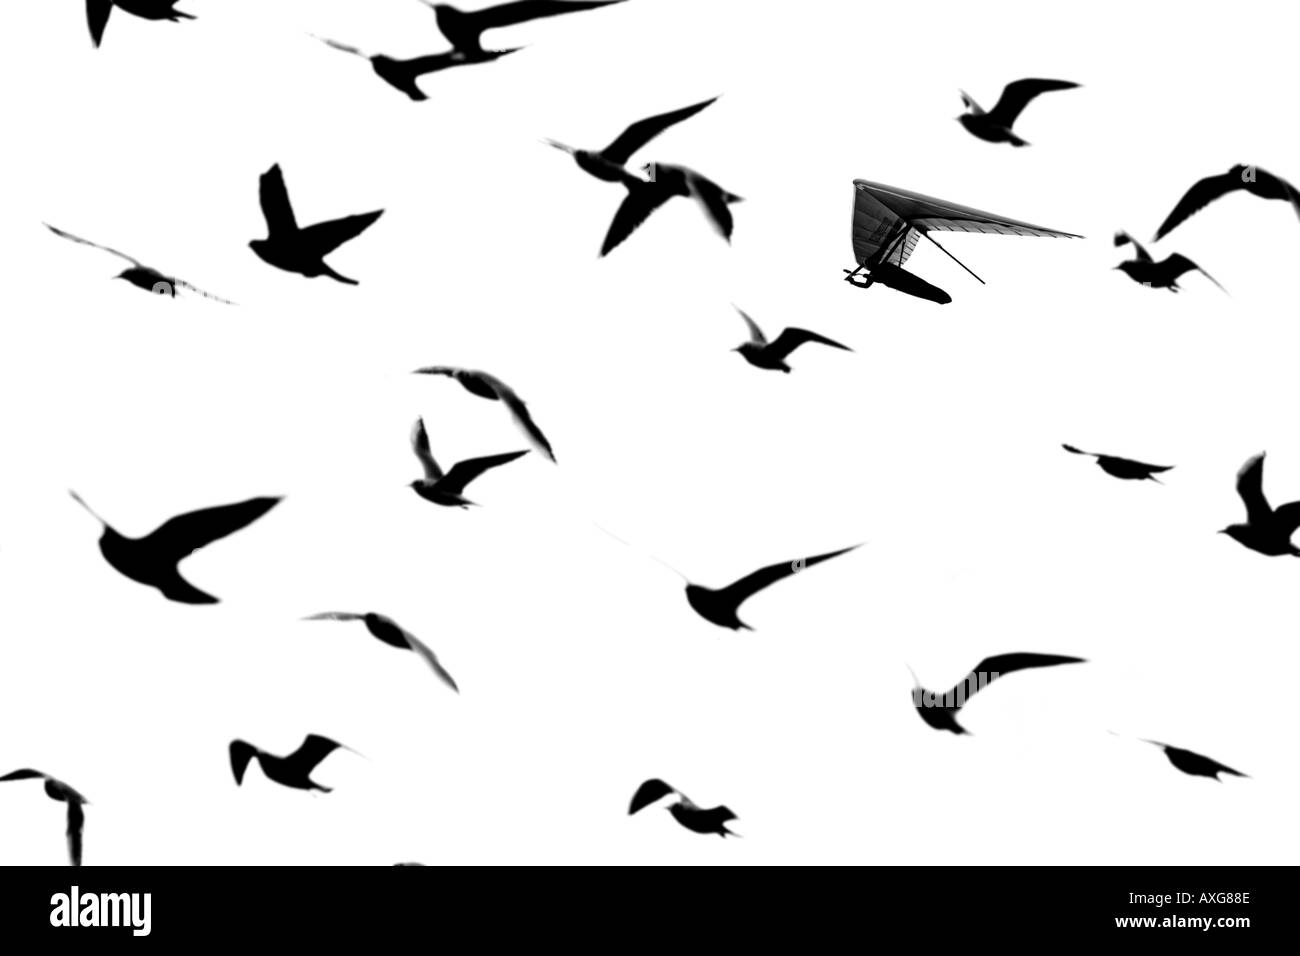 silhouette of a flock of seagulls and one hang glider flying against white background Stock Photo